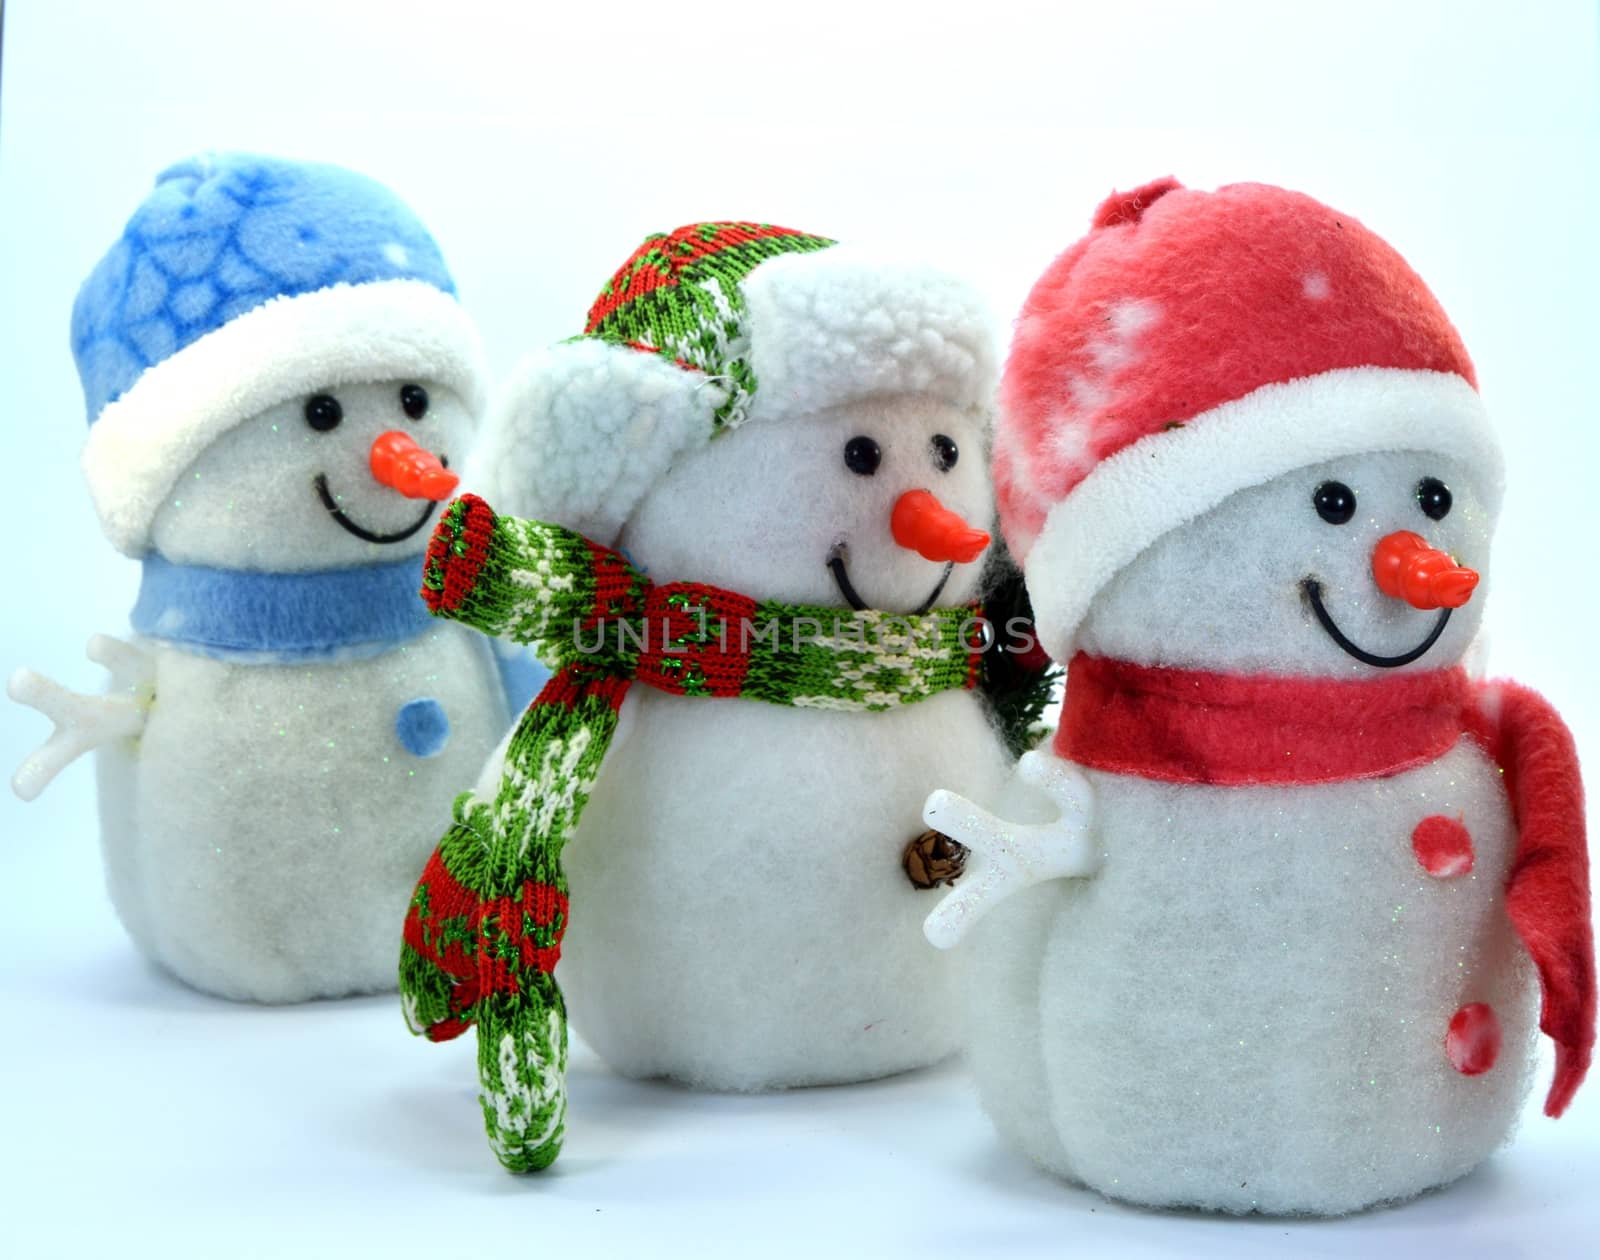 Trio of snowman in a row on a white background